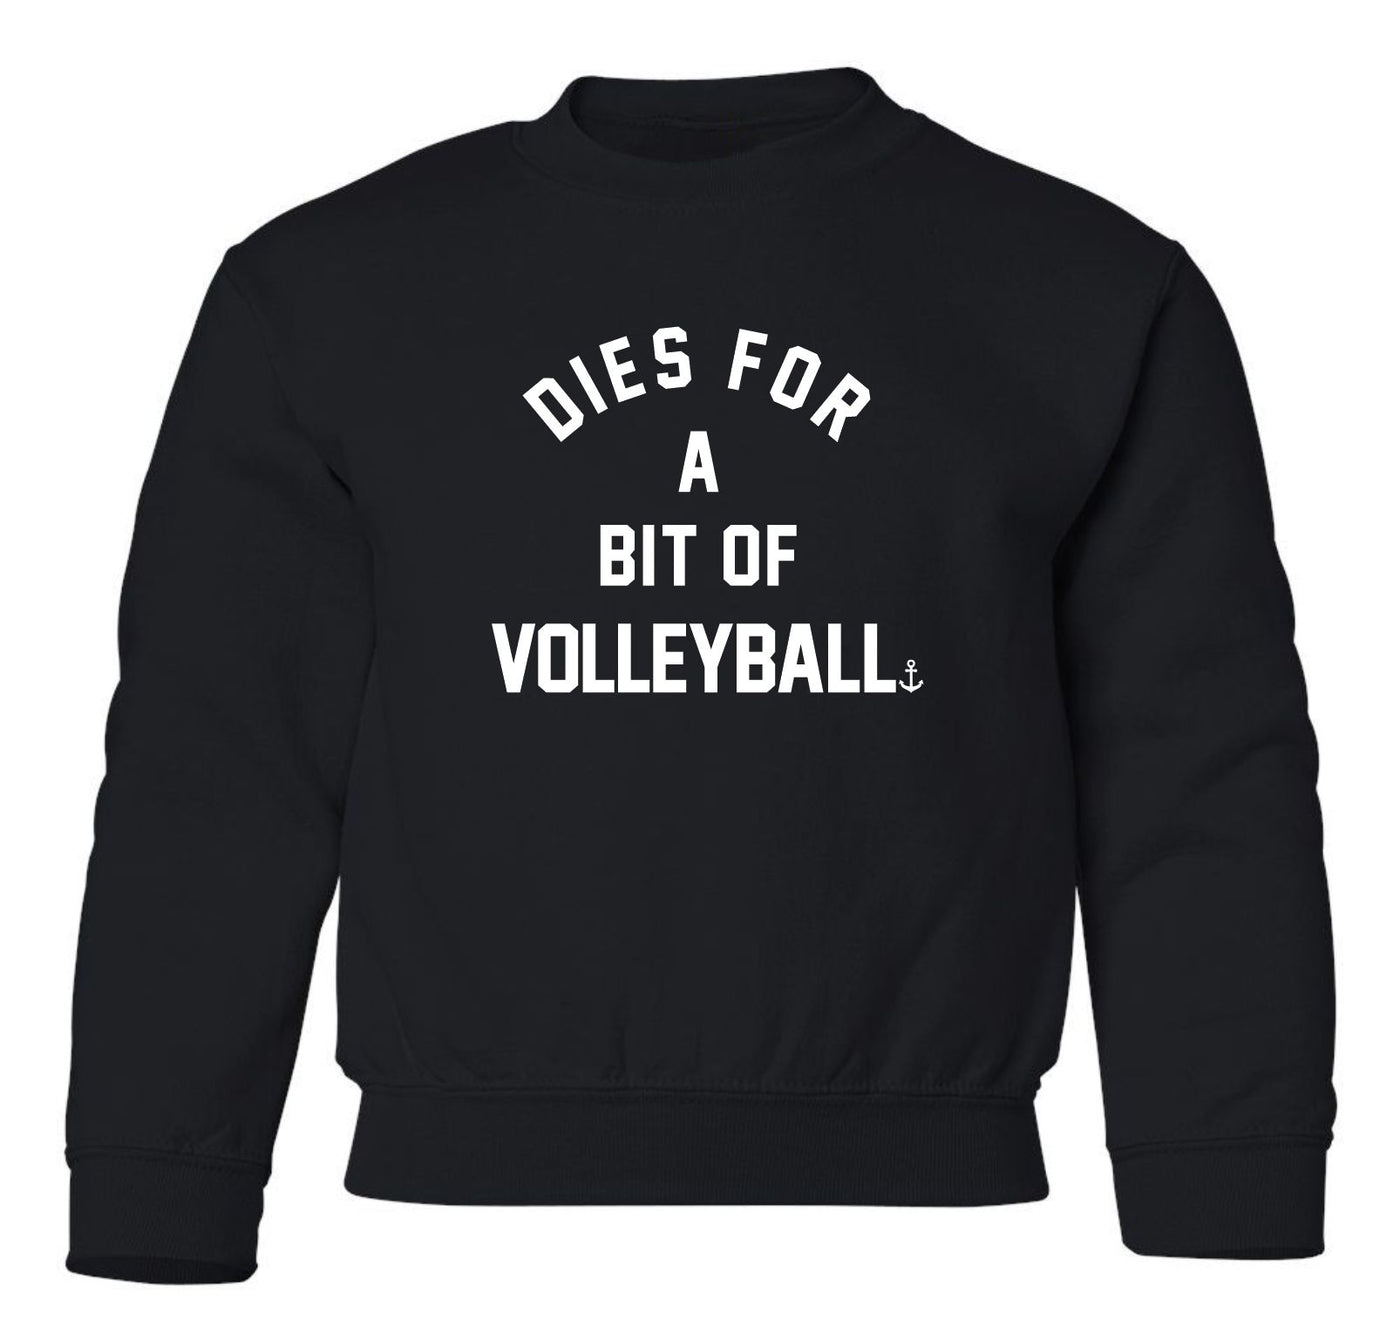 "Dies For A Bit Of Volleyball" Toddler/Youth Crewneck Sweatshirt